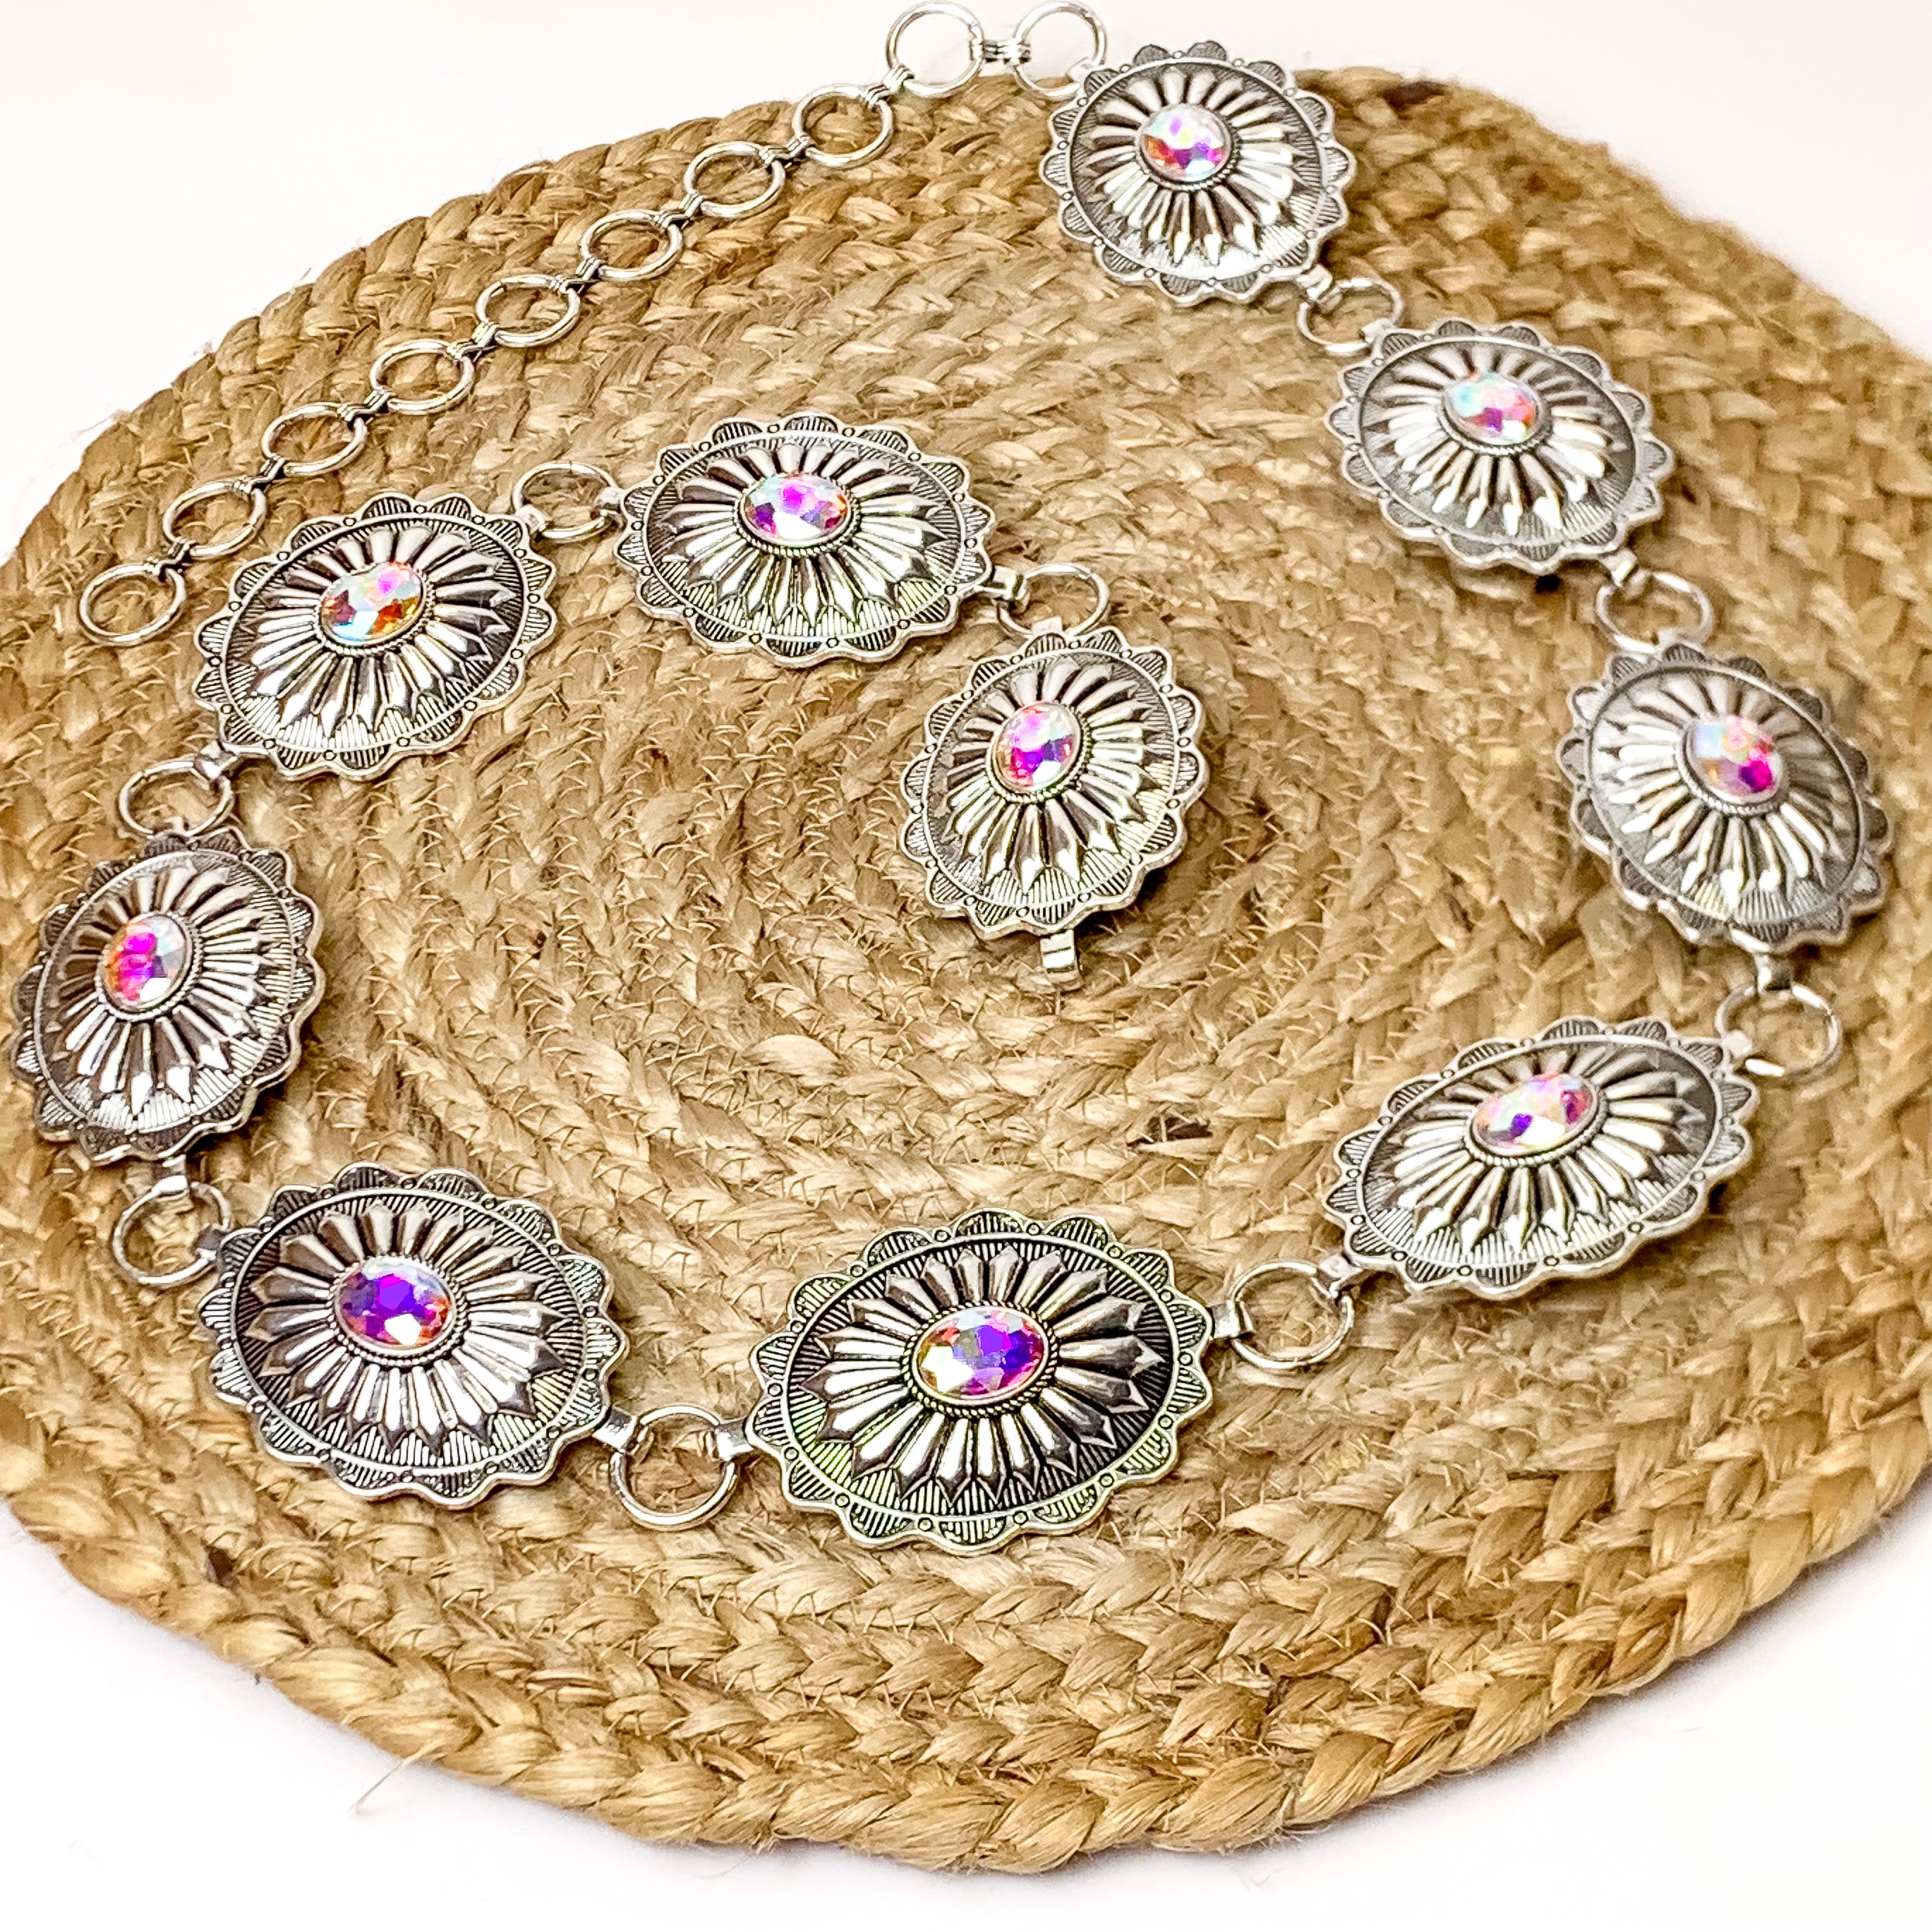 Silver Concho Chain Belt with Center AB Stones - Giddy Up Glamour Boutique